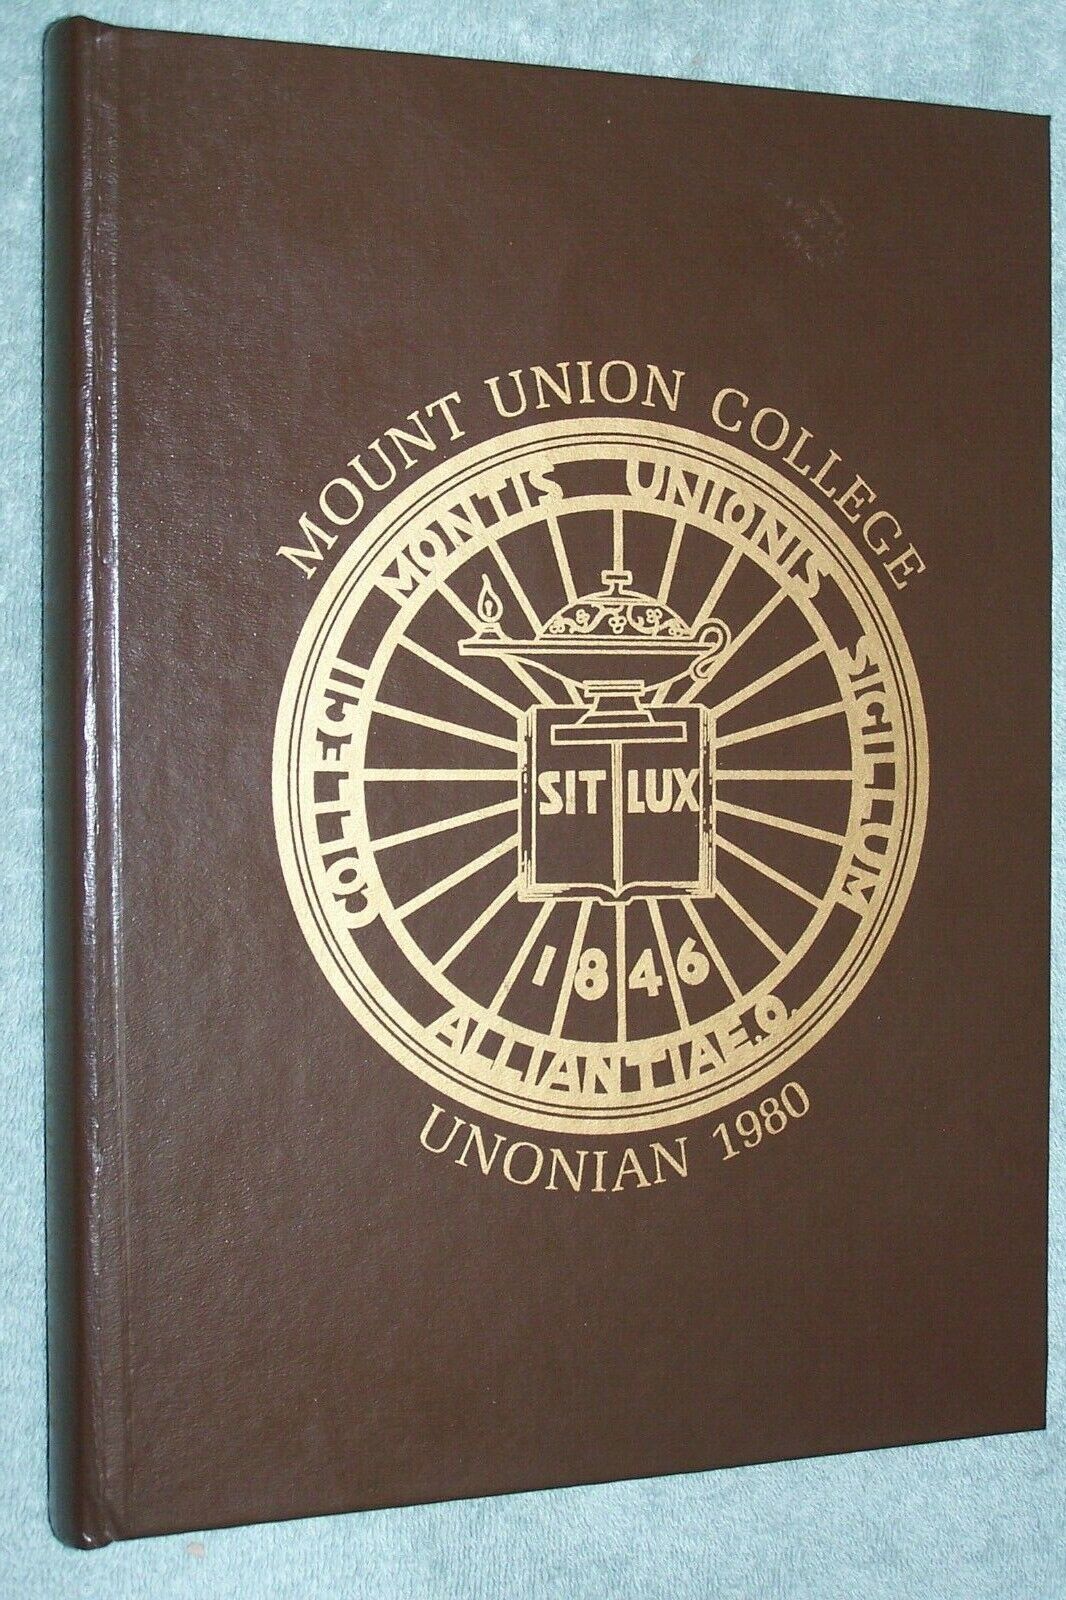 1980 Mount Union College Yearbook Annual Alliance Ohio OH - Unonian